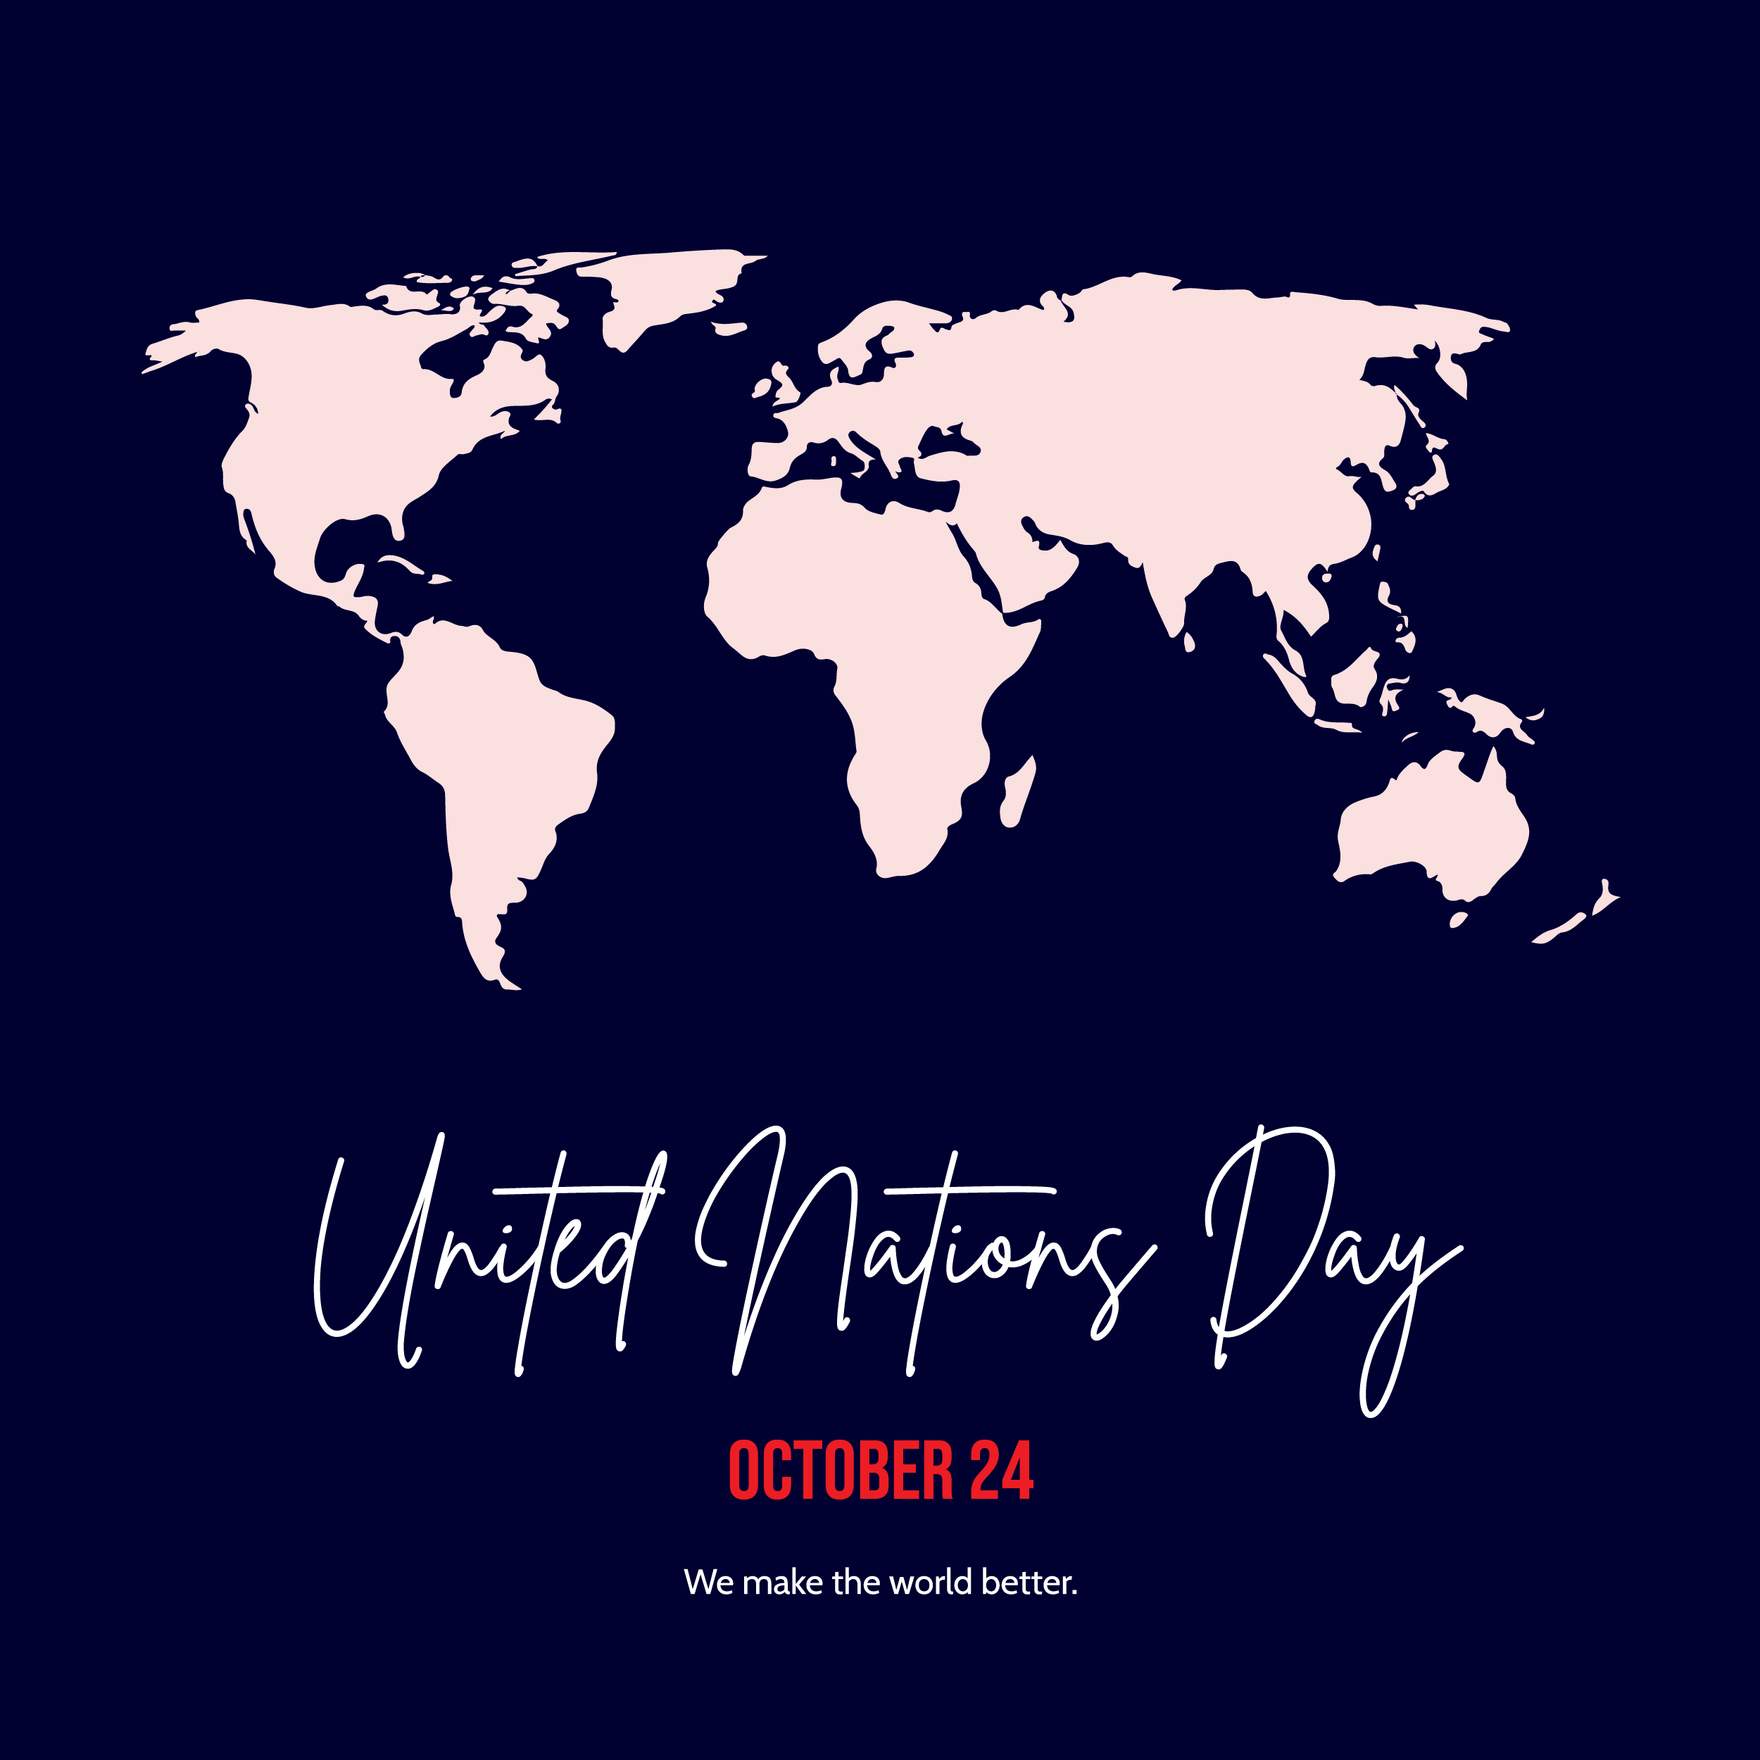 United Nations Day Whatsapp Post in Illustrator, PSD, EPS, SVG, JPG, PNG